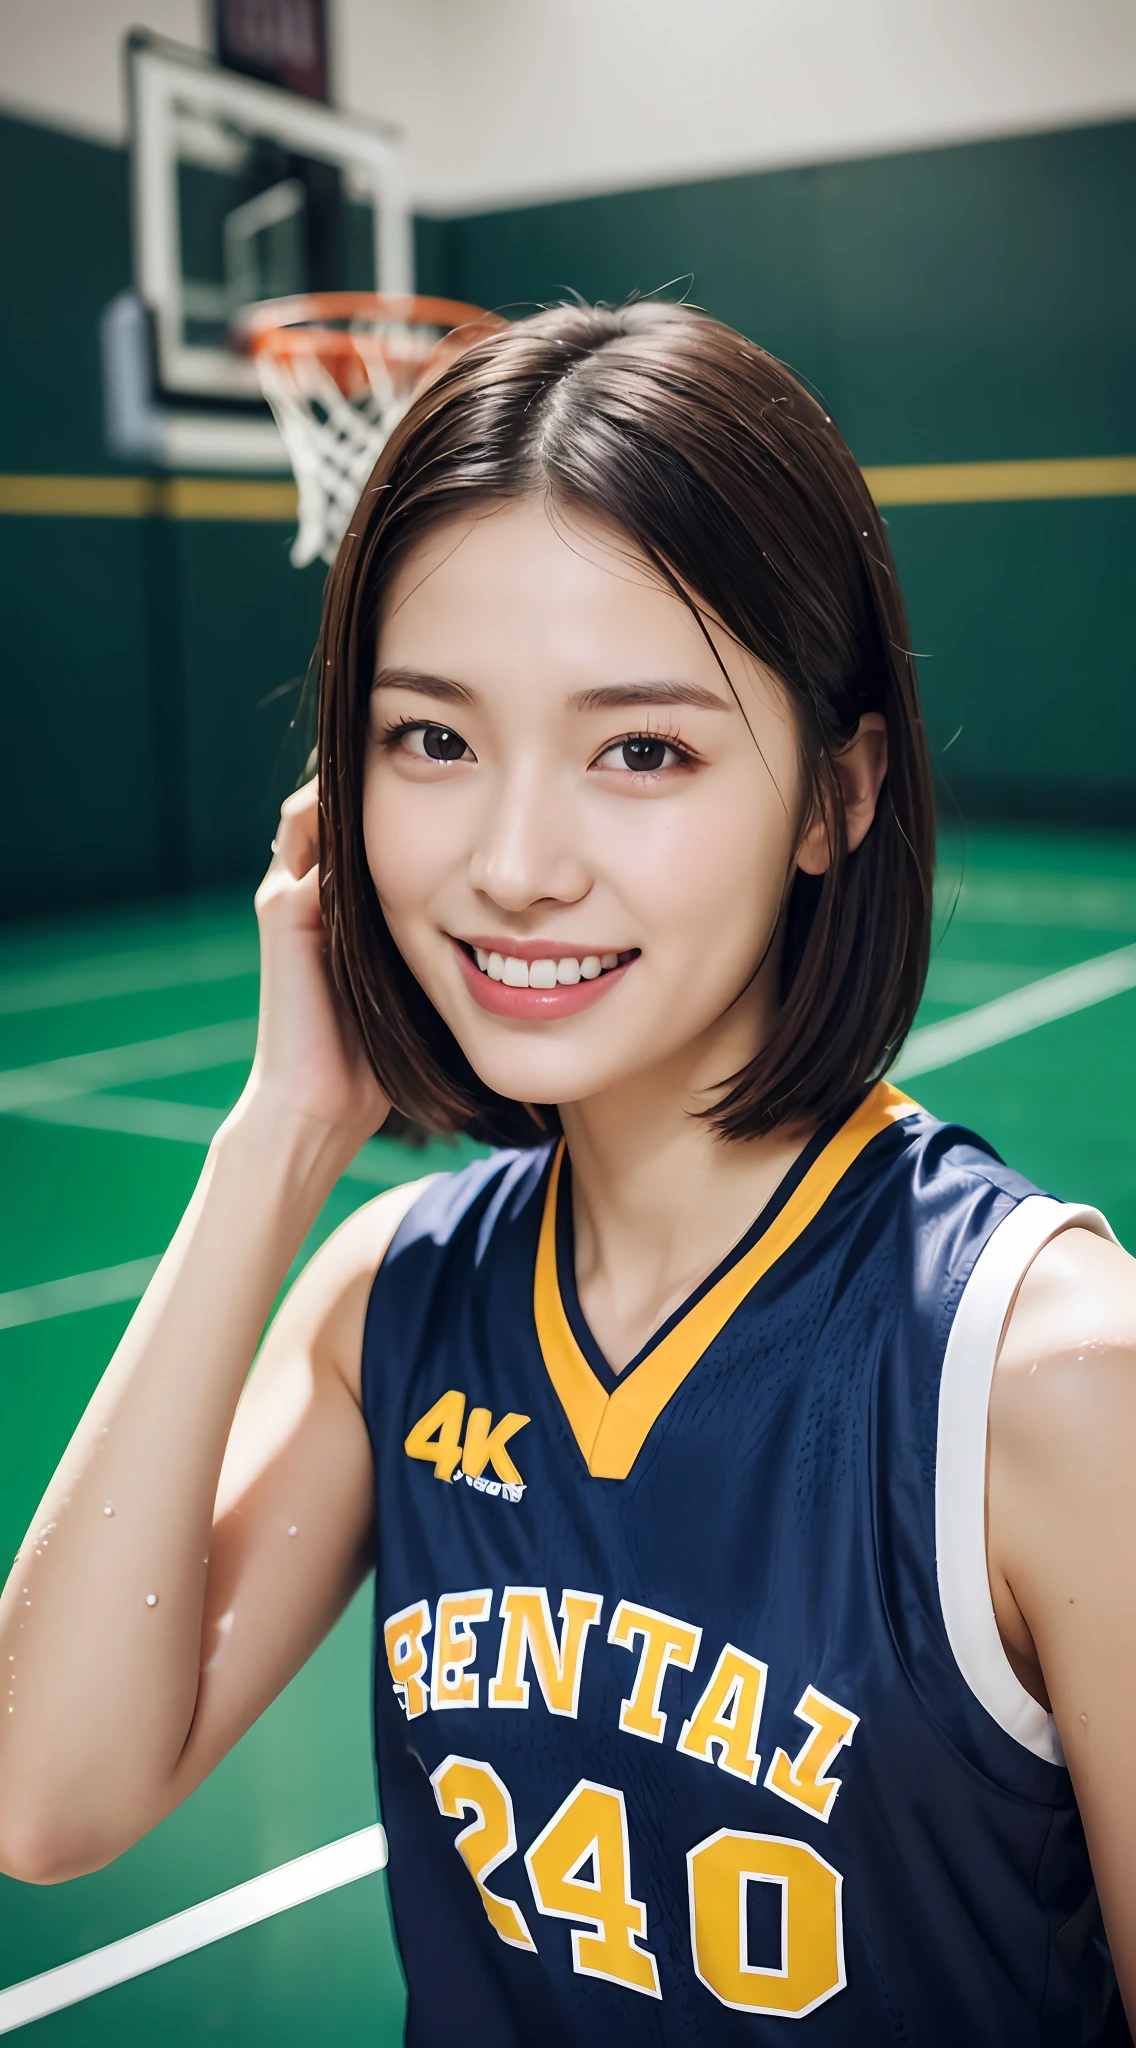 (4K、top-quality)、(realisitic、Photorealsitic)、
1girl in、solo、Red Basketball Uniform、7 times、Indoor basketball court、(Bob Hair:1.3)、(wetting hair:1.1)、(Sweat on the face:0.8)、(wetted skin:1.1)、A smile、
perfect hand、finerly detailed face、20yr old、